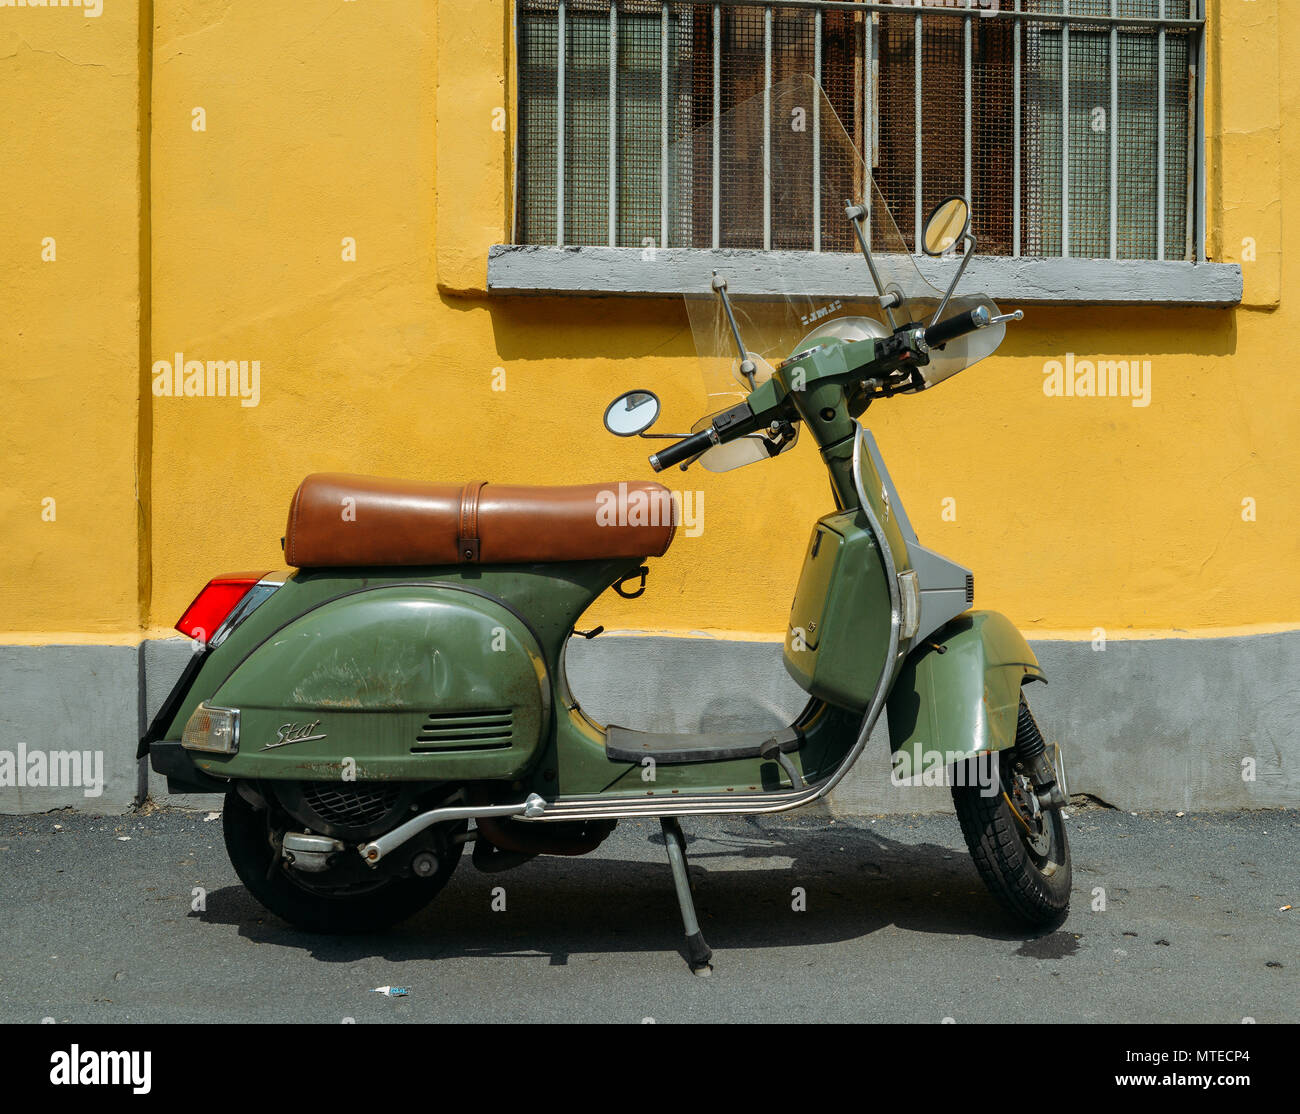 Green Piaggio Vespa LML T5 150 parked on side of street with yellow background Stock Photo